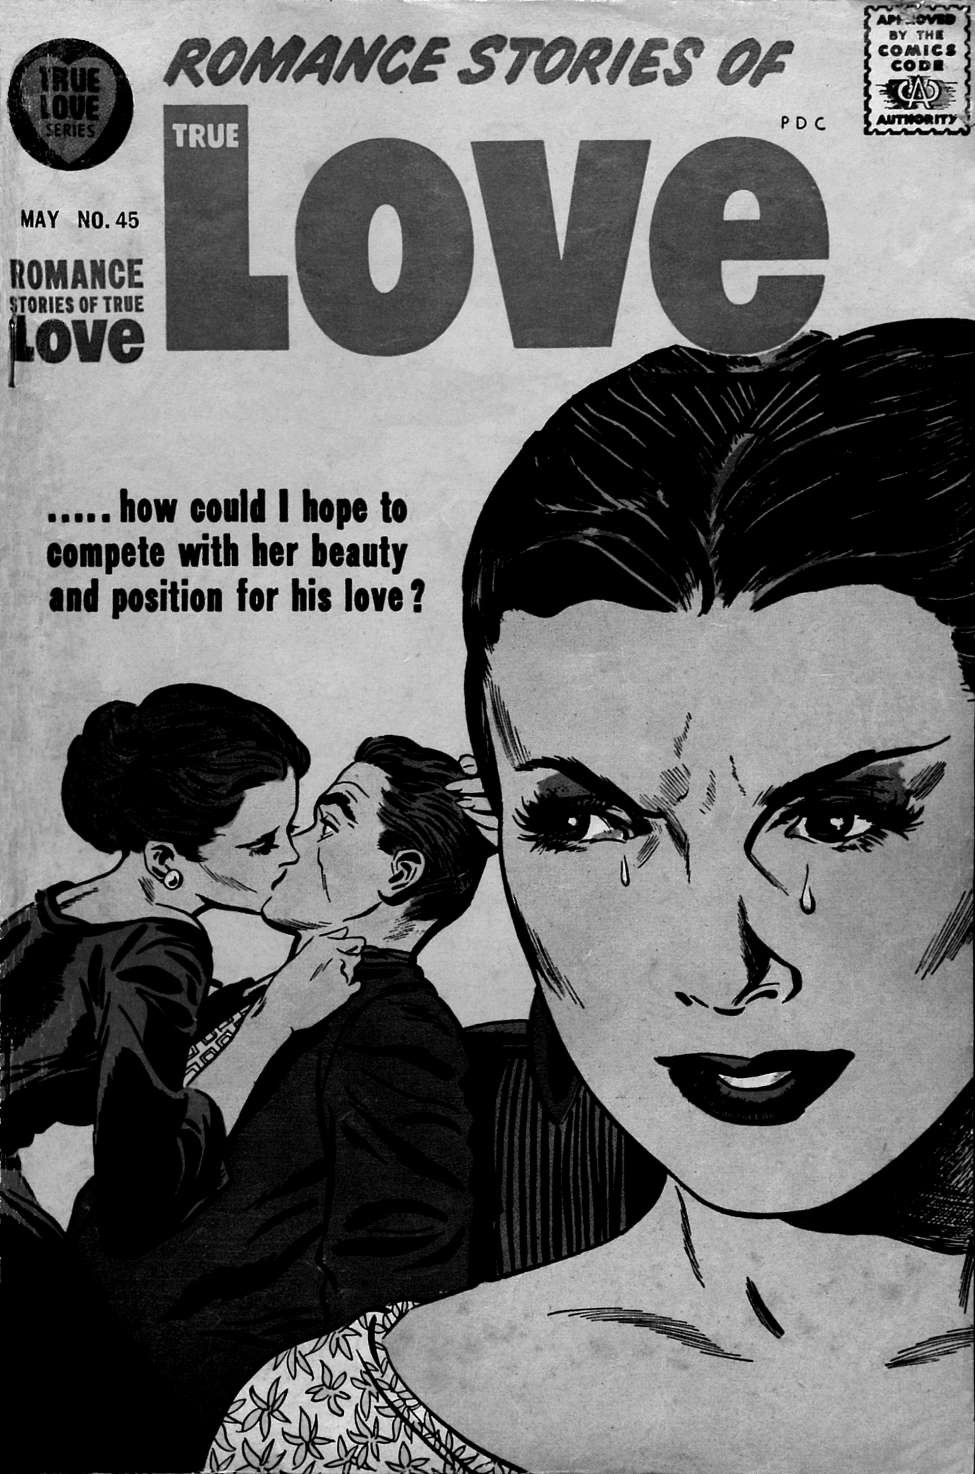 Comic Book Cover For Romance Stories of True Love 45 (Special Ed.) - Version 2